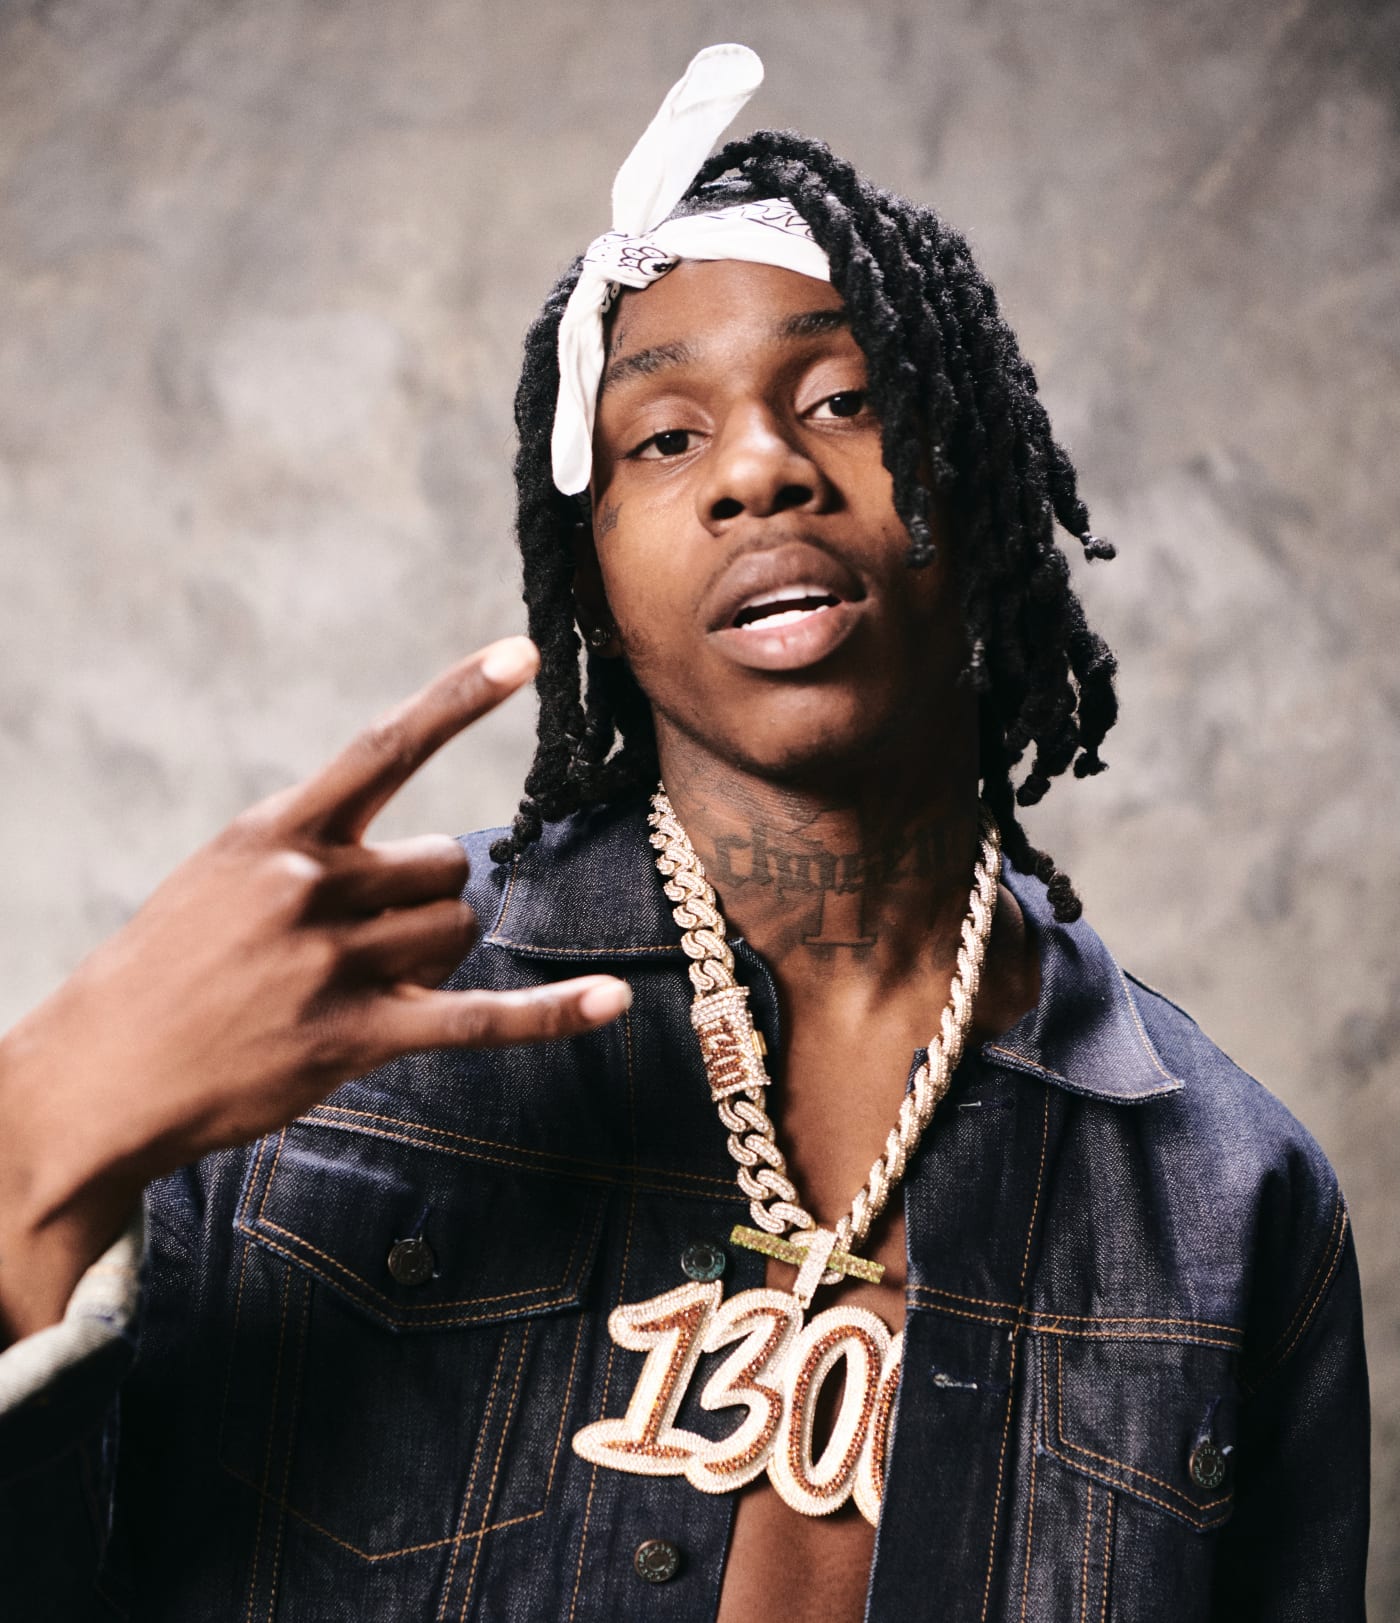 Polo G Net Worth, Relation, Age, Full Bio & More